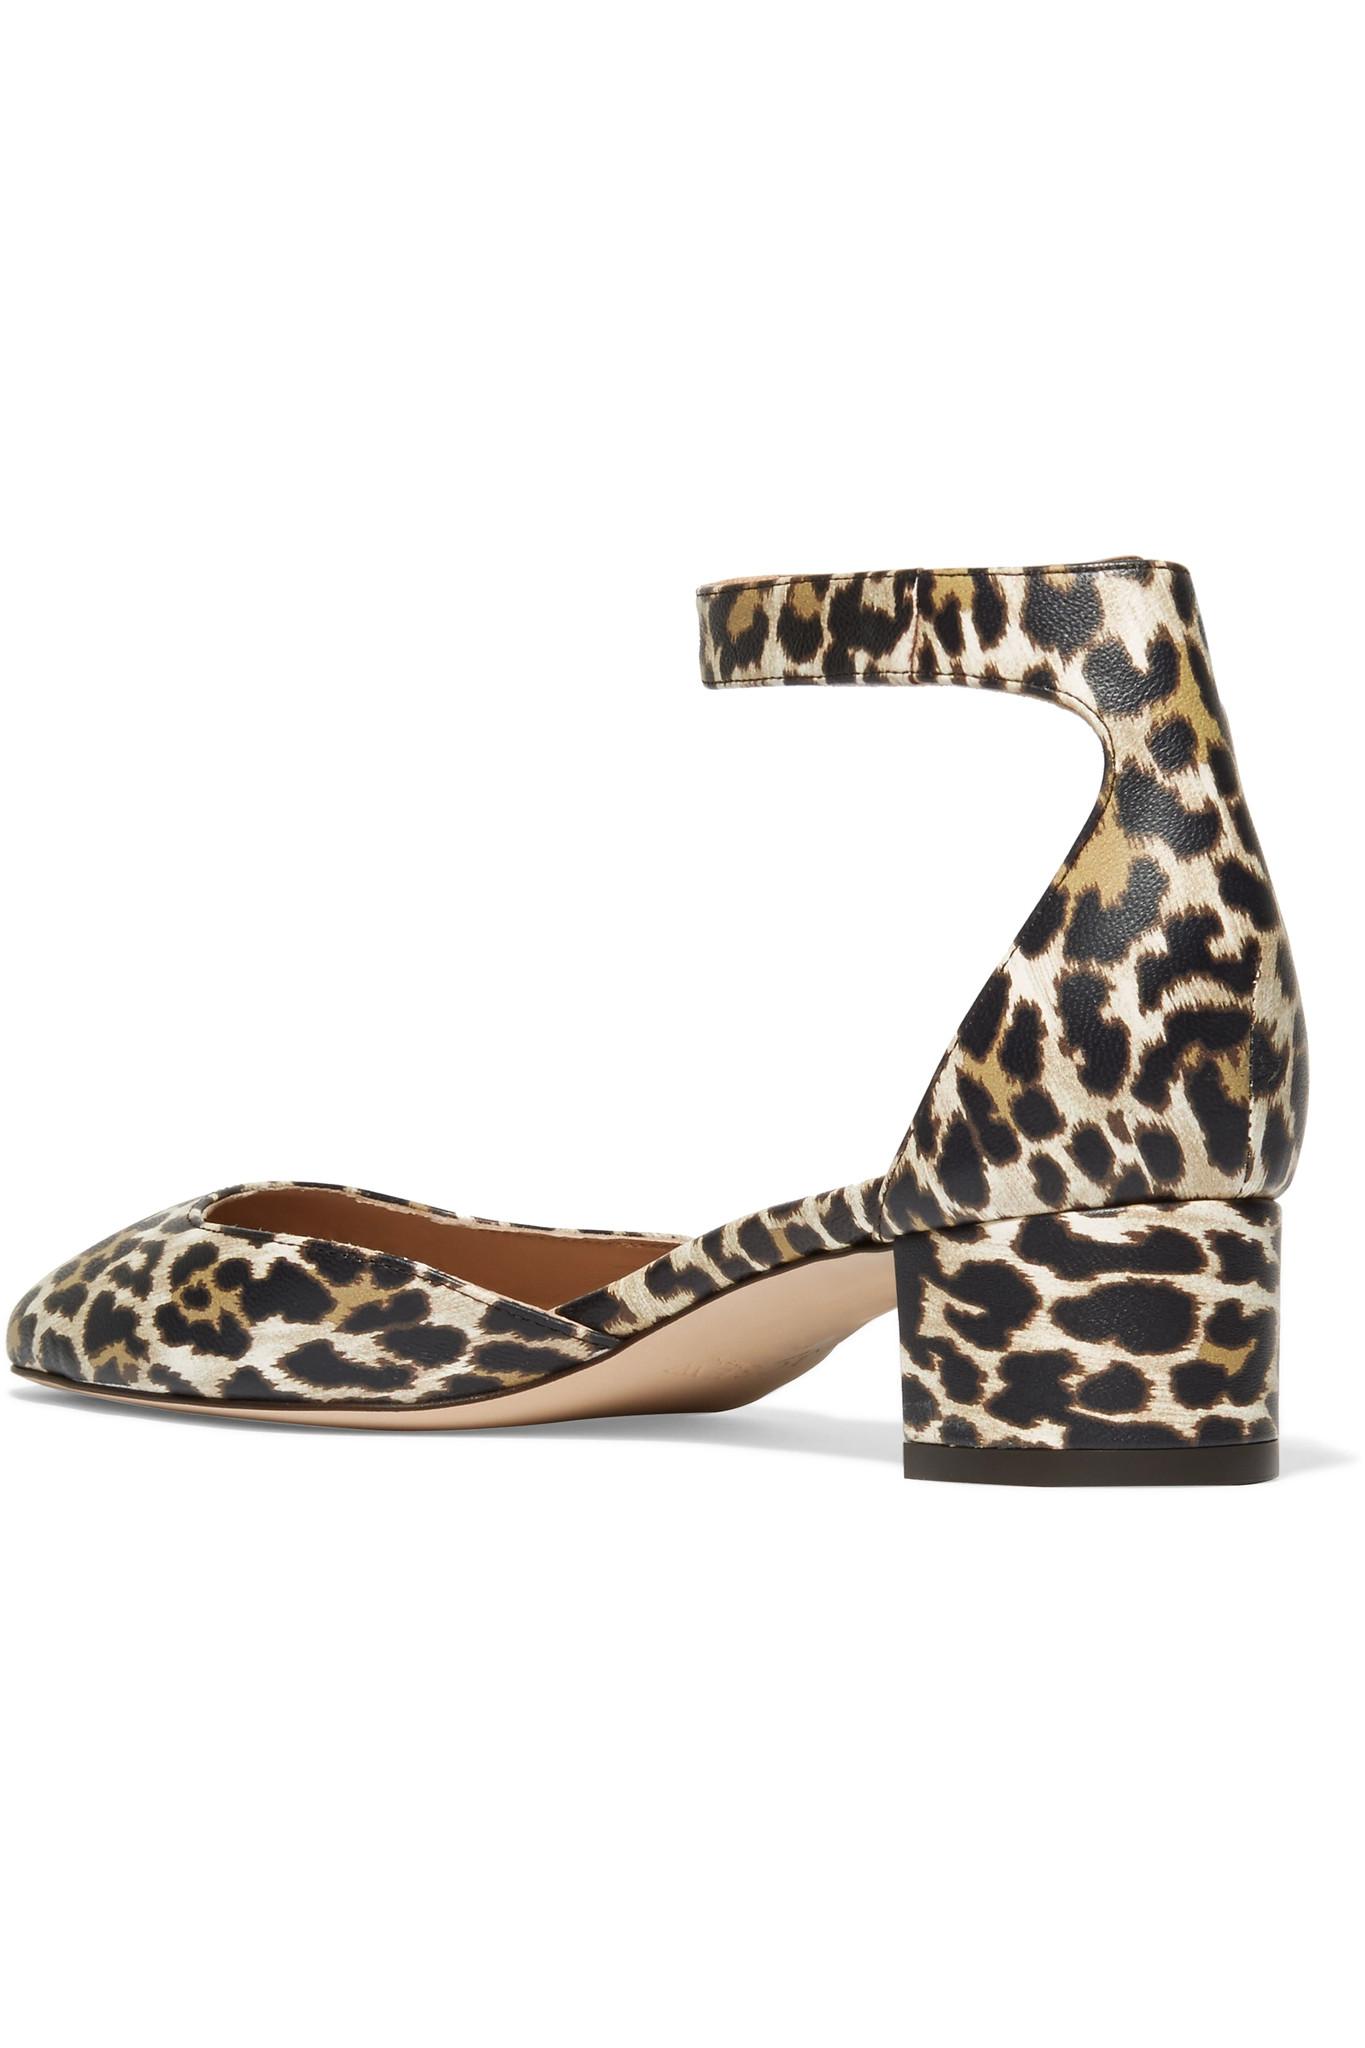 J.Crew Evelyn Leopard-print Leather Pumps - Lyst